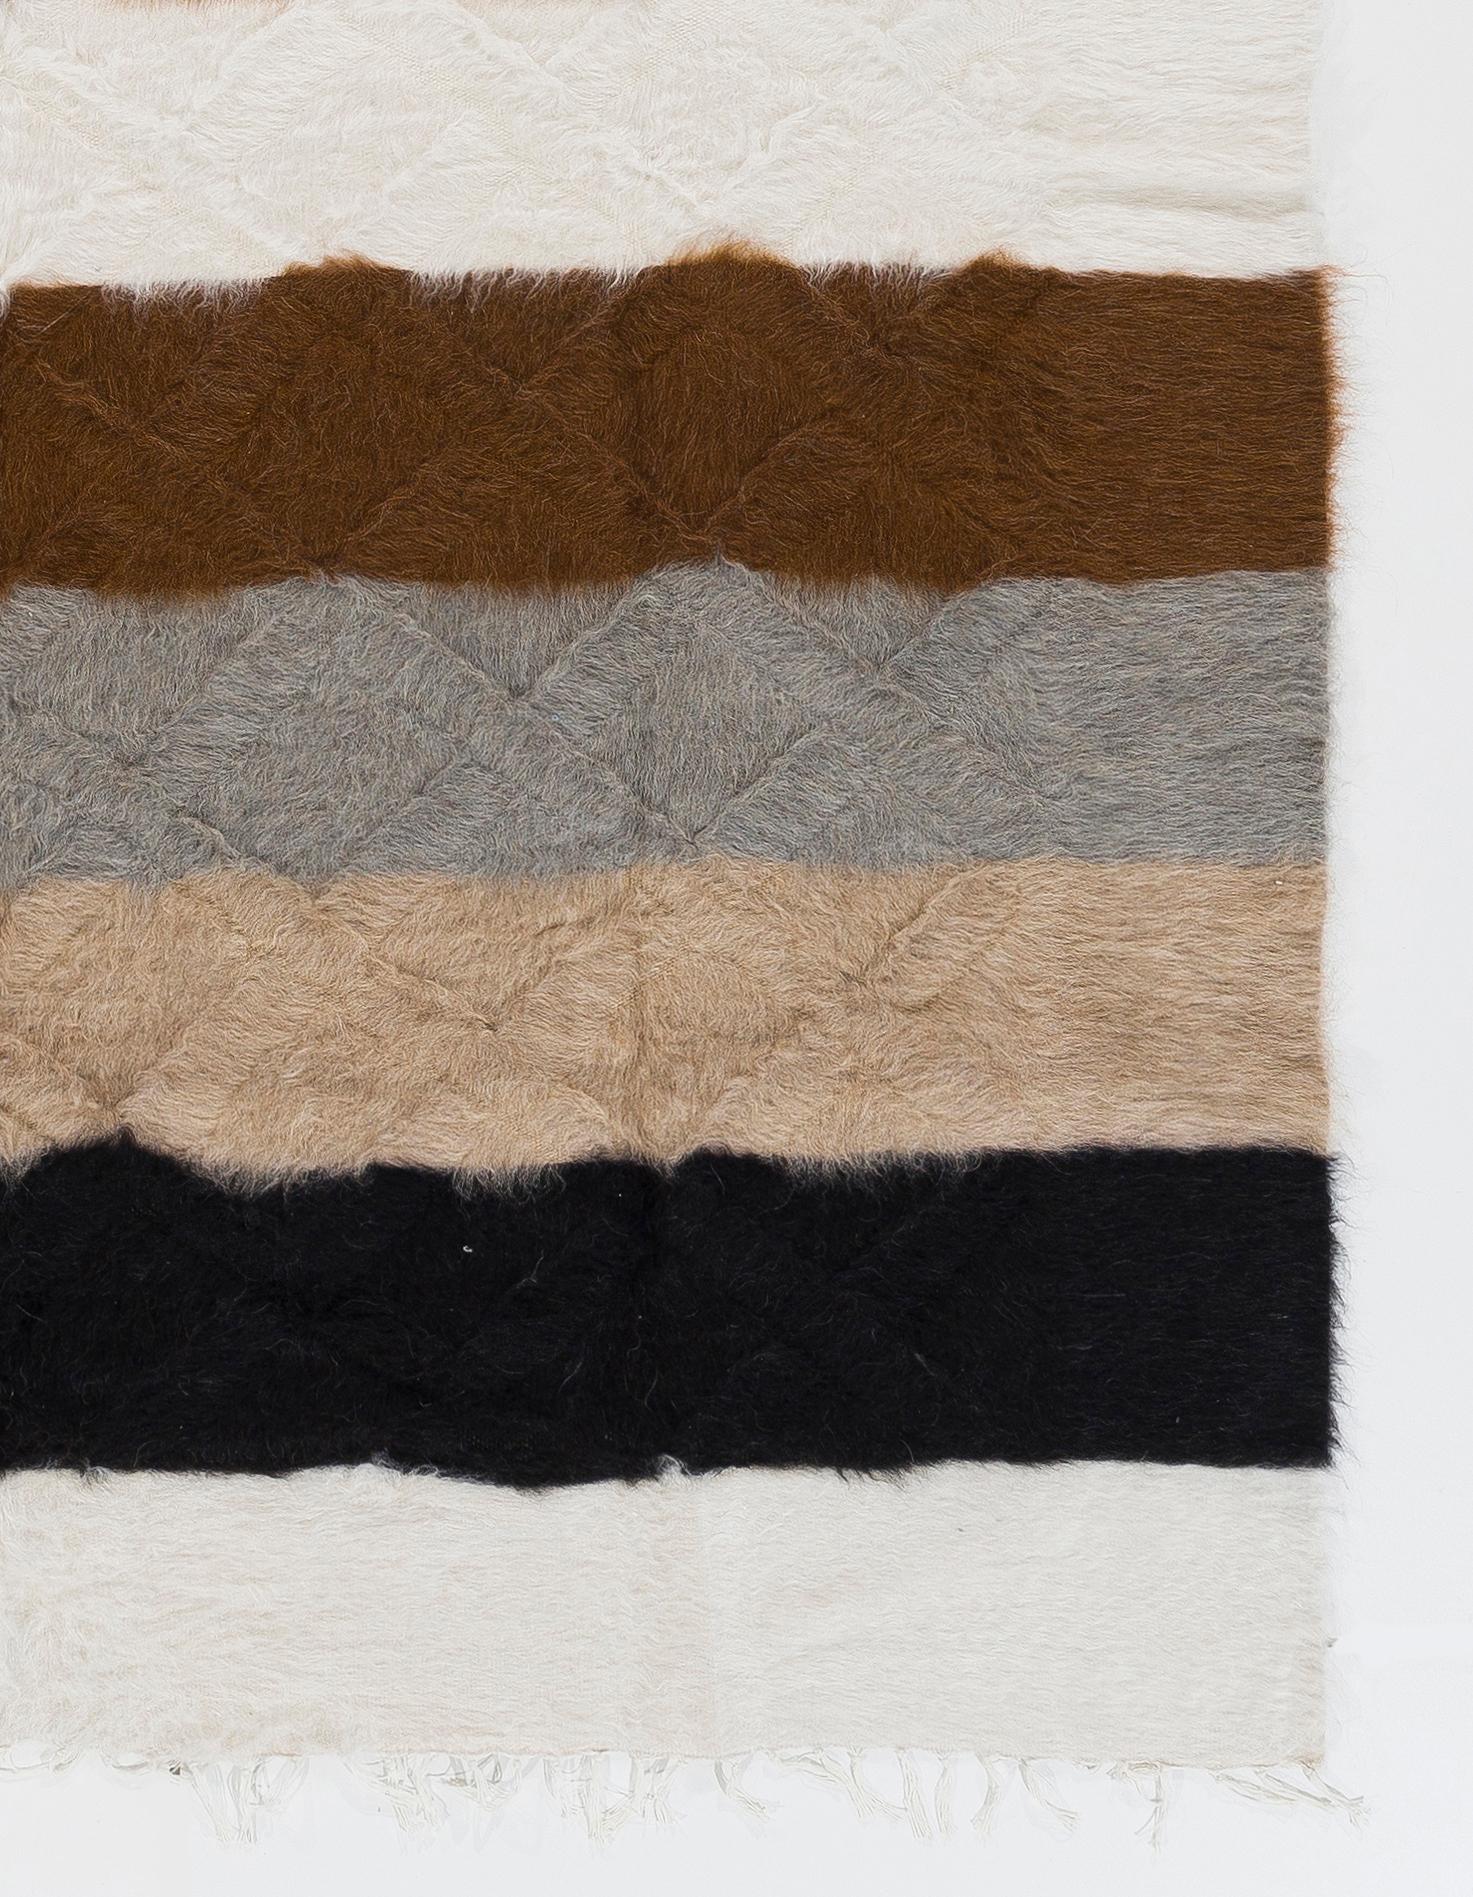 Hand-Woven 6x7.4 Ft Soft Mohair Wool Kilim Rug, Floor Covering, Bed Cover, Sofa Throw For Sale